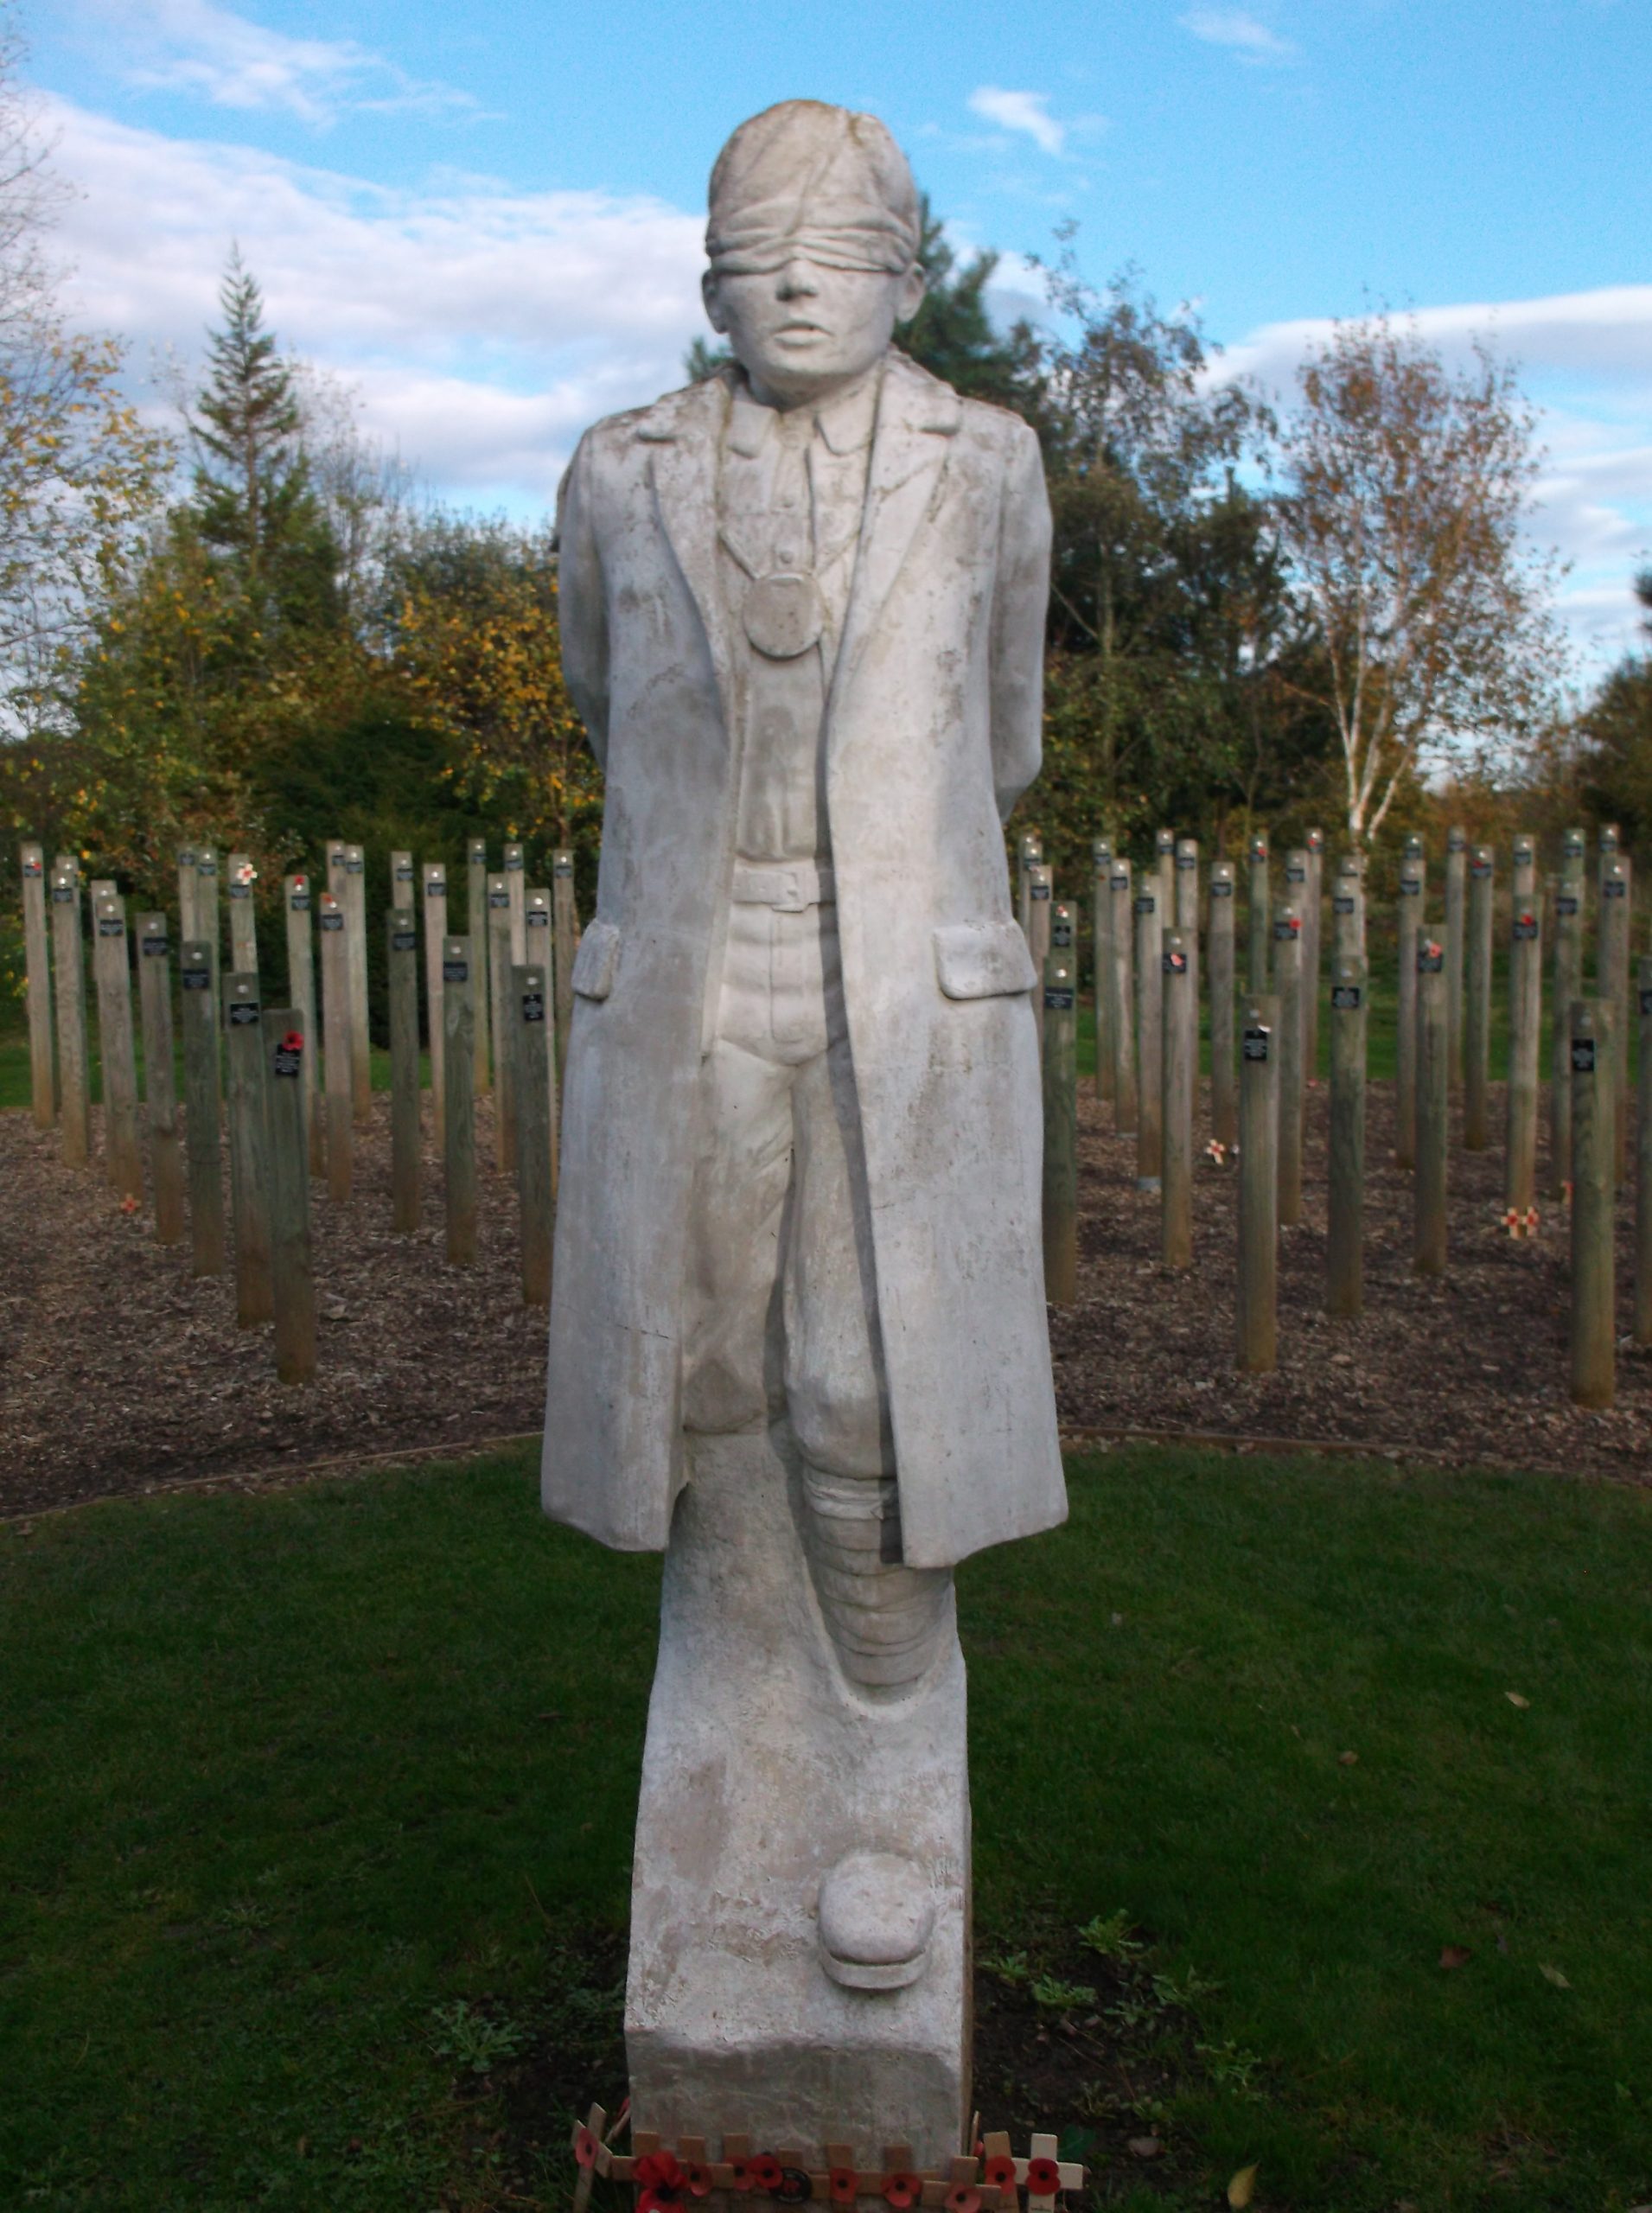 A large white statue of a man wearing a blindfold